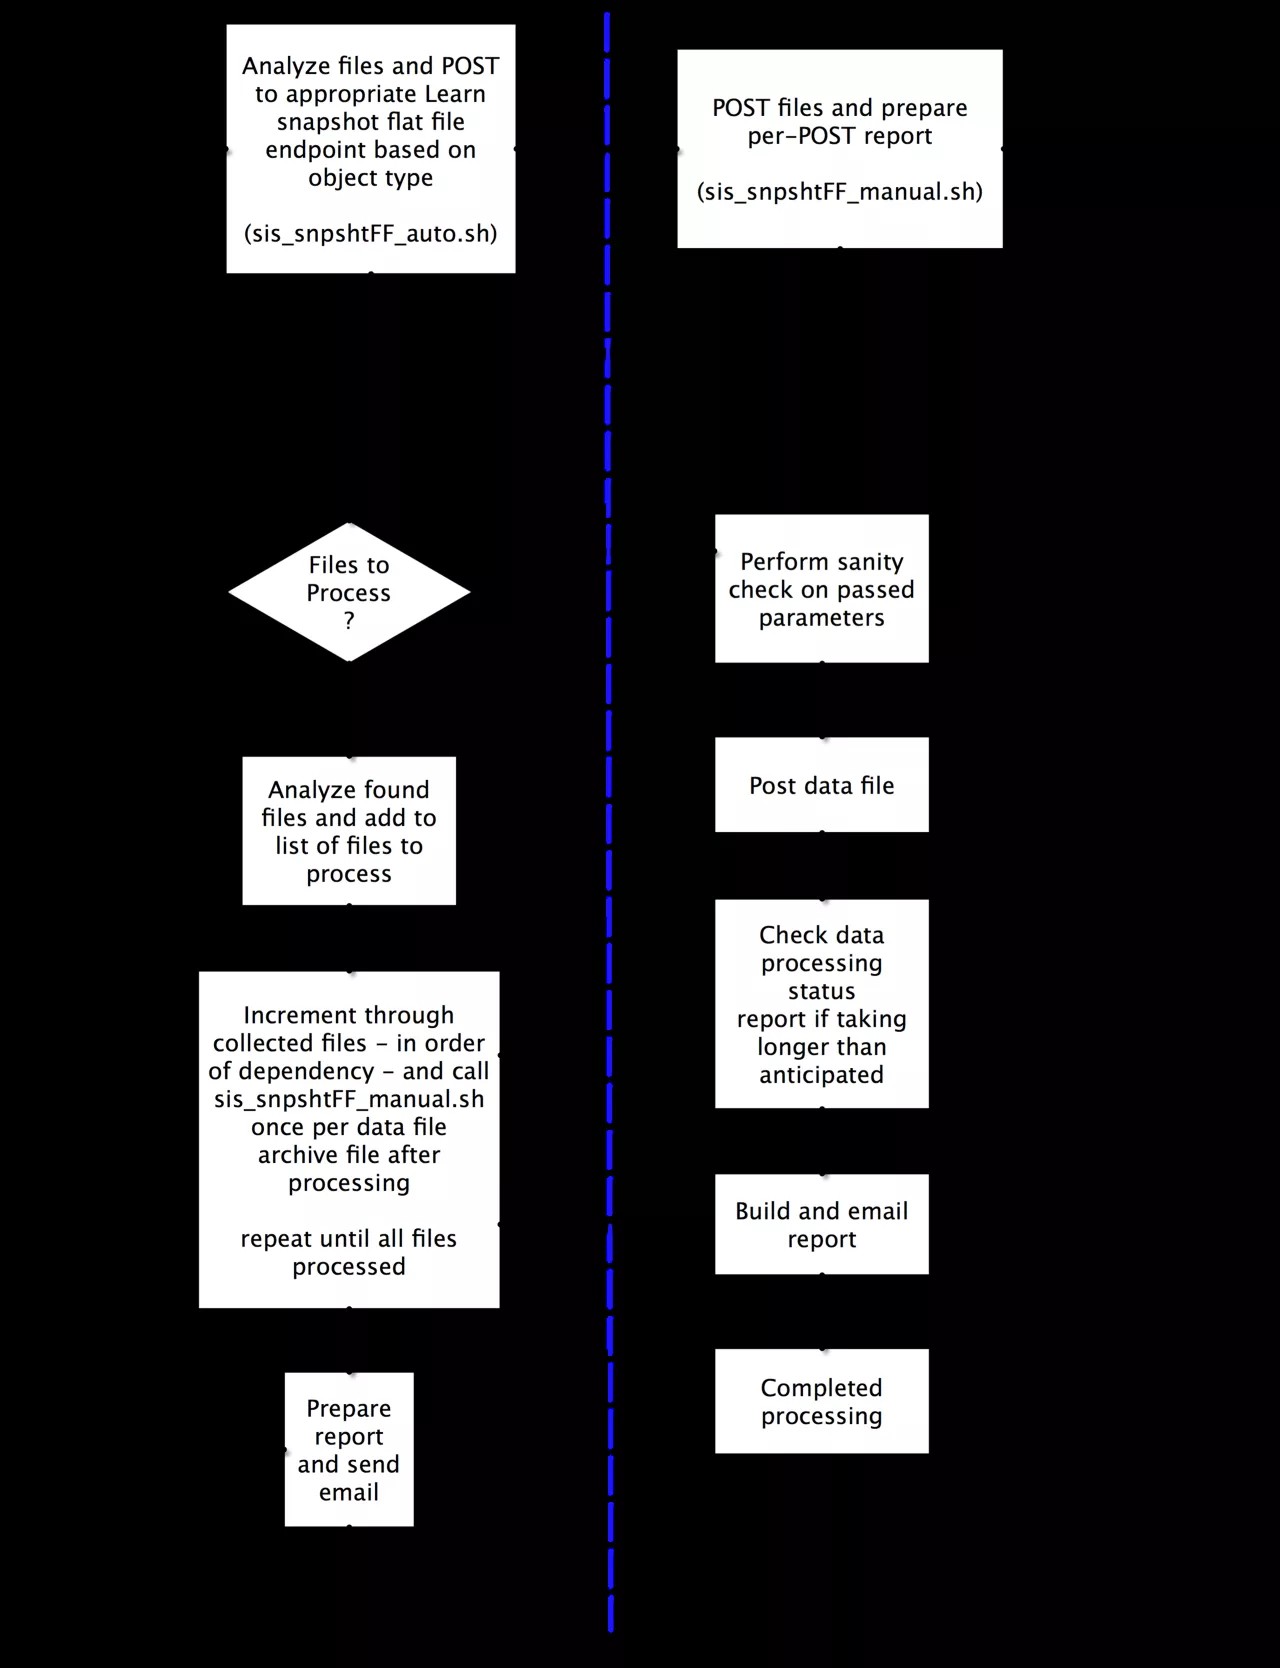 Diagram of general workflow for snapshot automation including of the scripted portion of the process. We have two scripts sis_snpshtFF_auto.sh, on the left, and sis_snpshtFF_manual.sh, on the right.